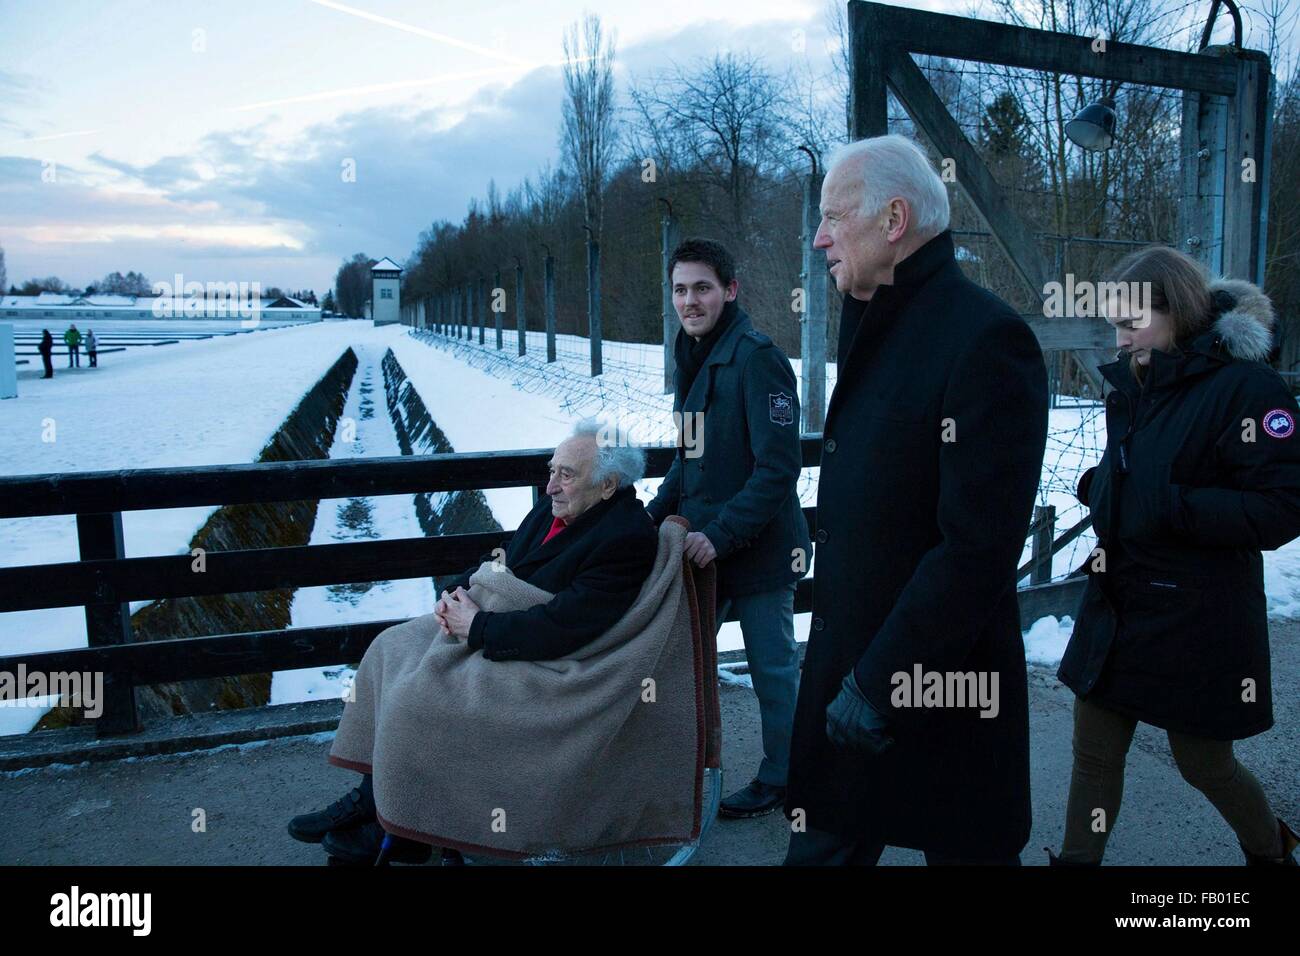 U.S Vice President Joe Biden and his granddaughter Finnegan Biden tour the Dachau Nazi concentration camp with Max Mannheimer, a 95-year-old Holocaust survivor February 8, 2015 in Dachau, Germany. Stock Photo